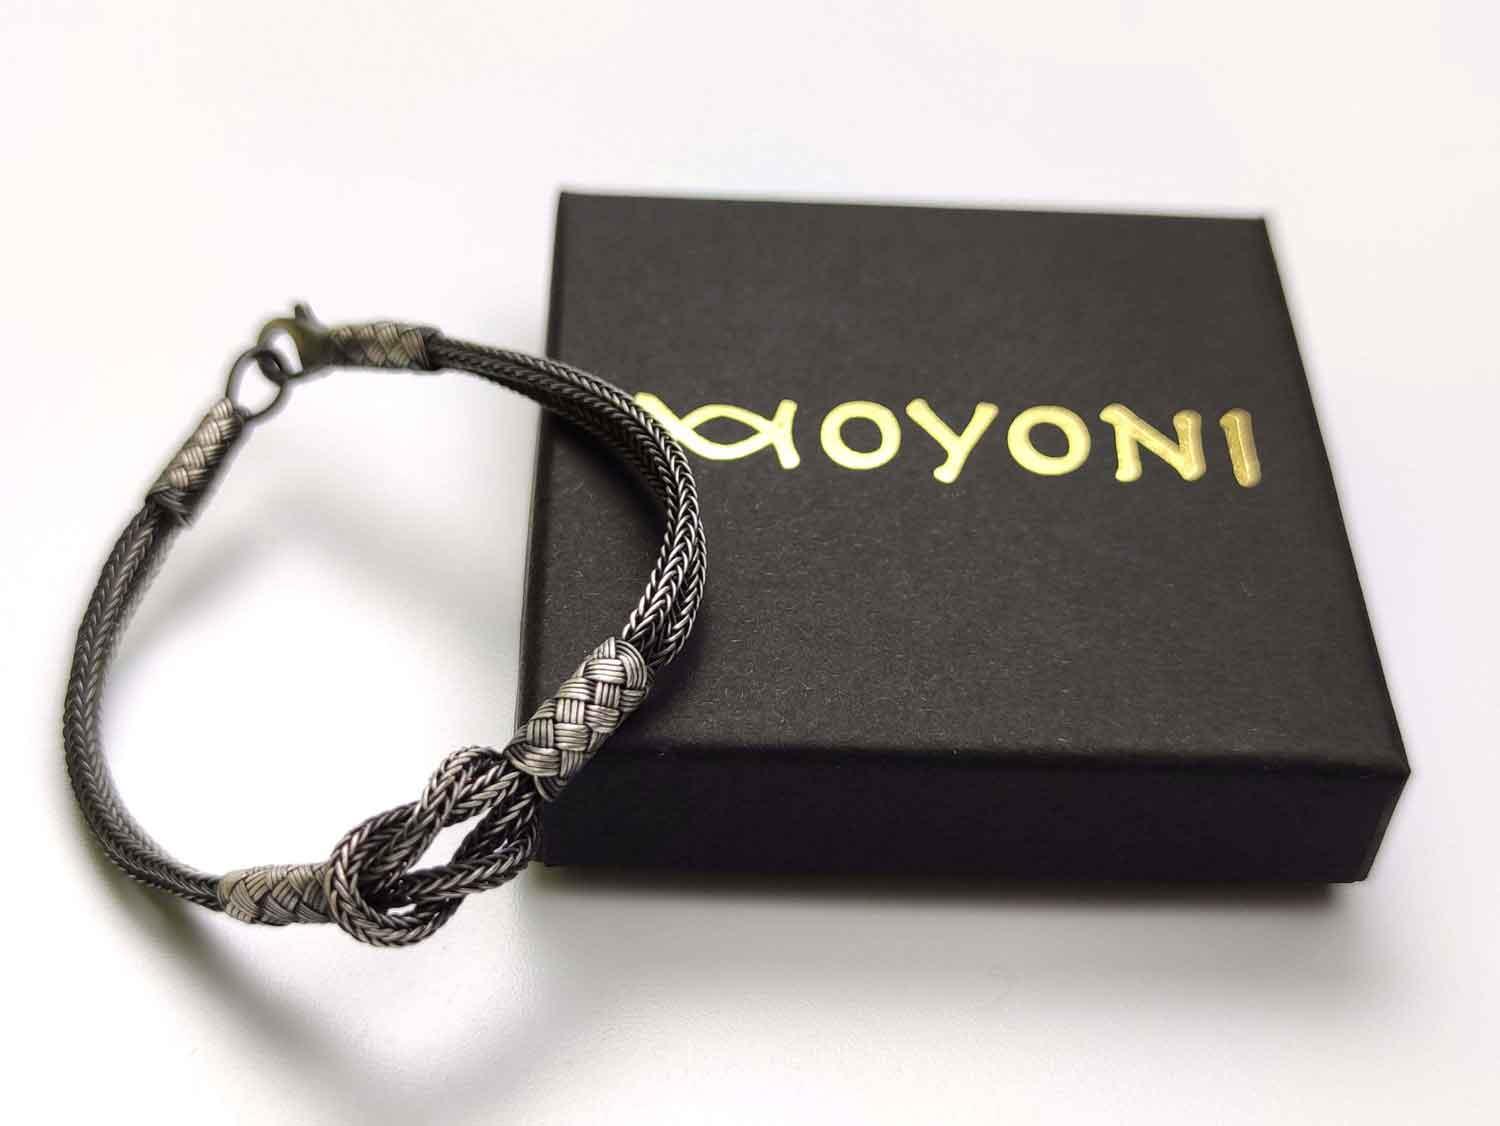 Exquisite BRAIDED BRACELET, Sterling Silver, Weaved Handmade Bracelet, Silver Chain Bracelet, Layered Bracelet, Birthday Gift Bracelet, Boho Bracelet available at Moyoni Design